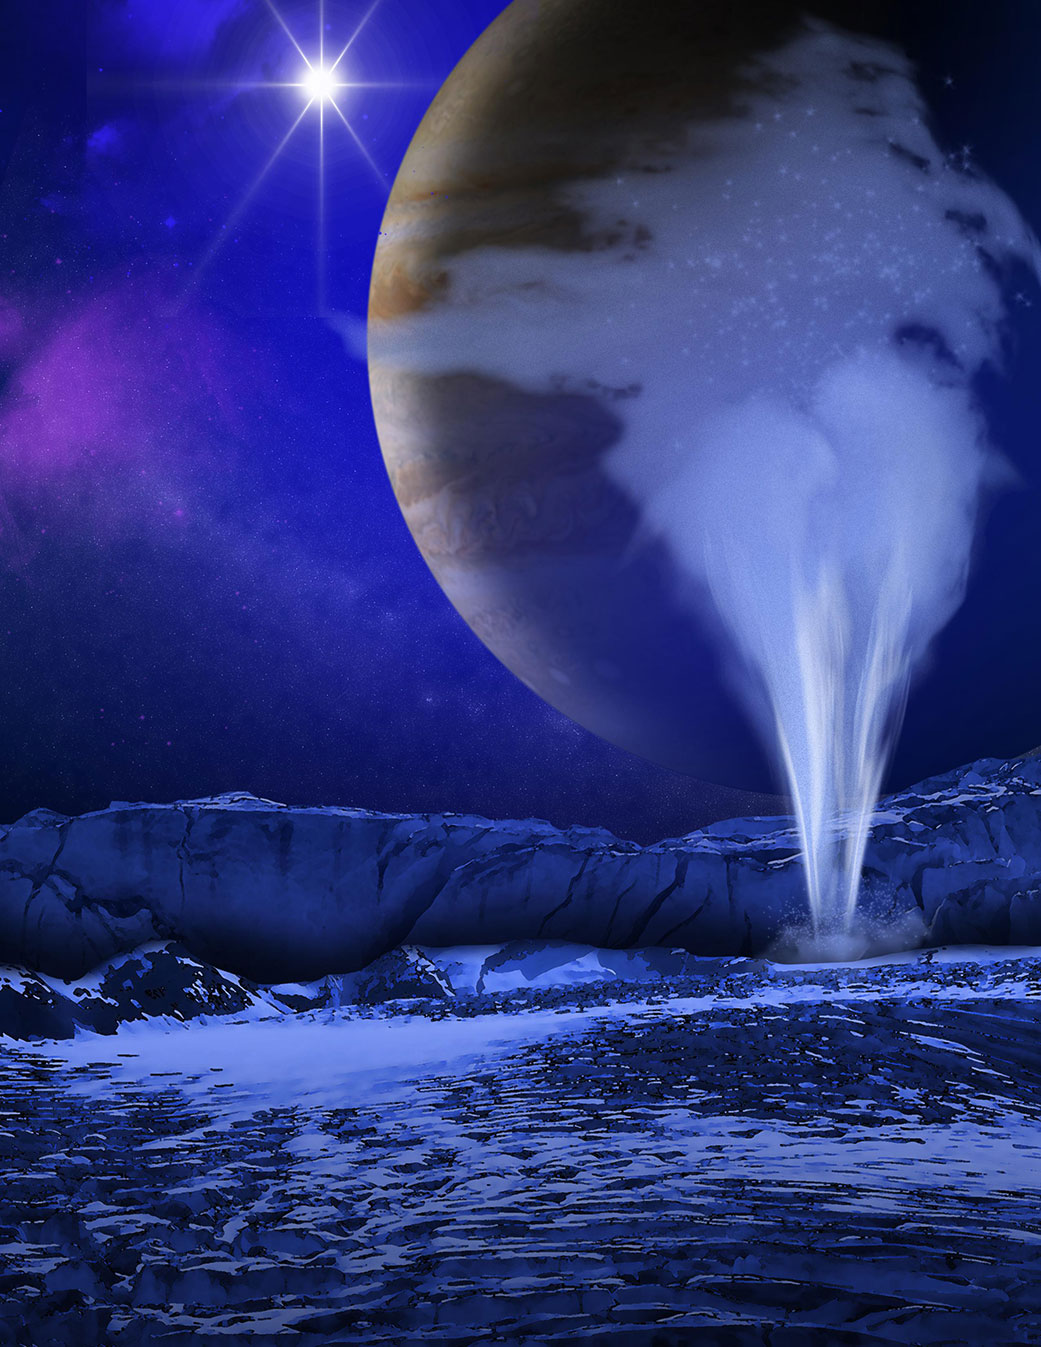 Shallow subsurface lakes may be the source of water emissions on Europa